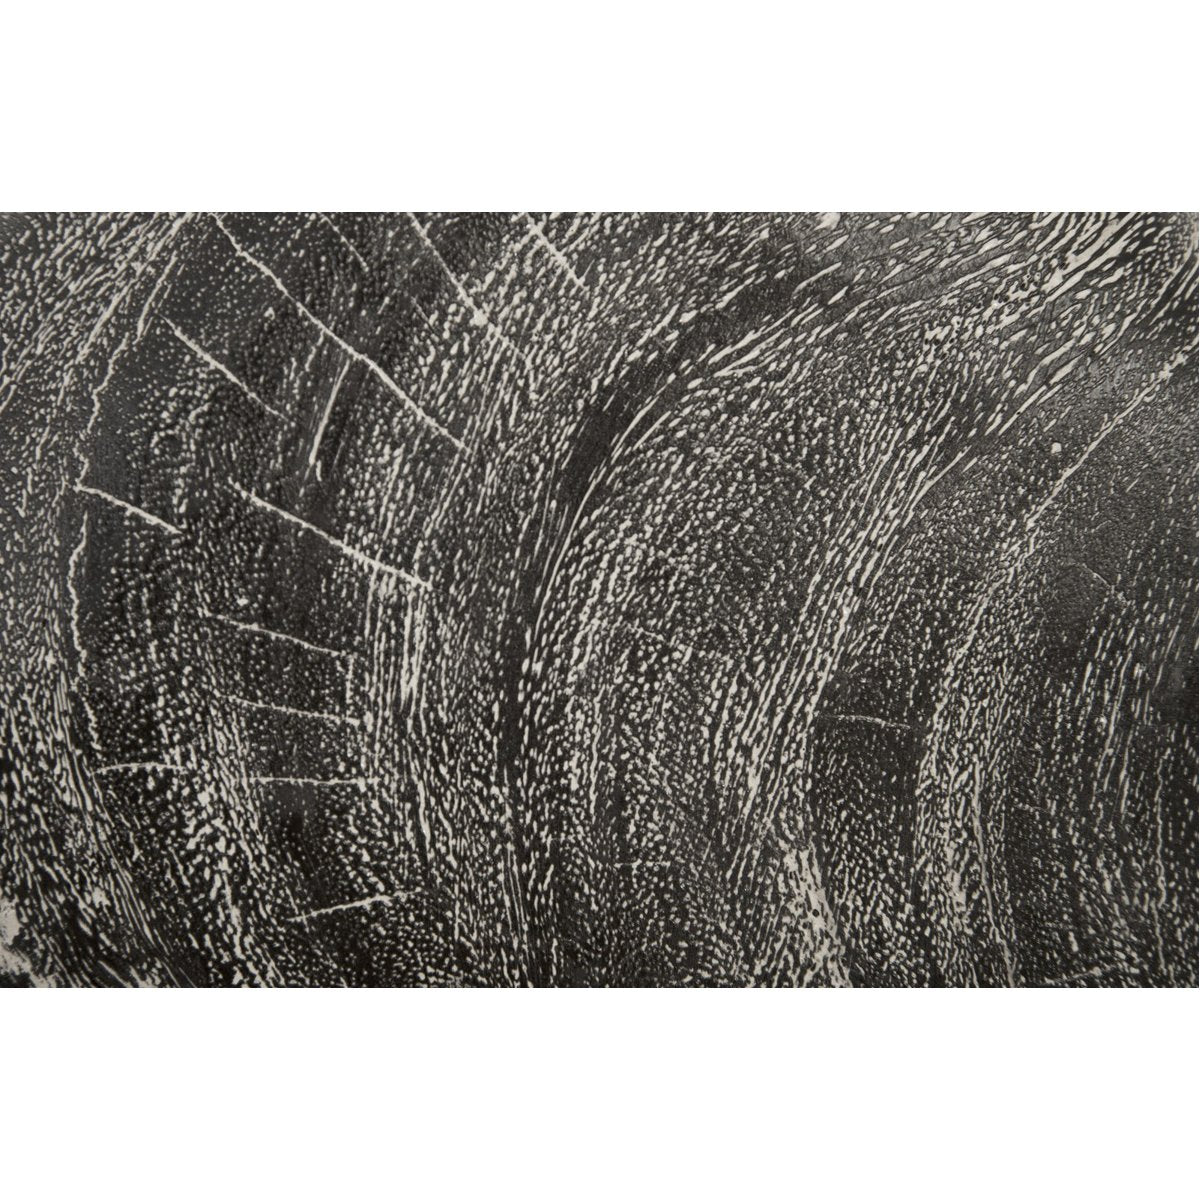 Phillips Collection River Stone Wood Wall Tile, Medium